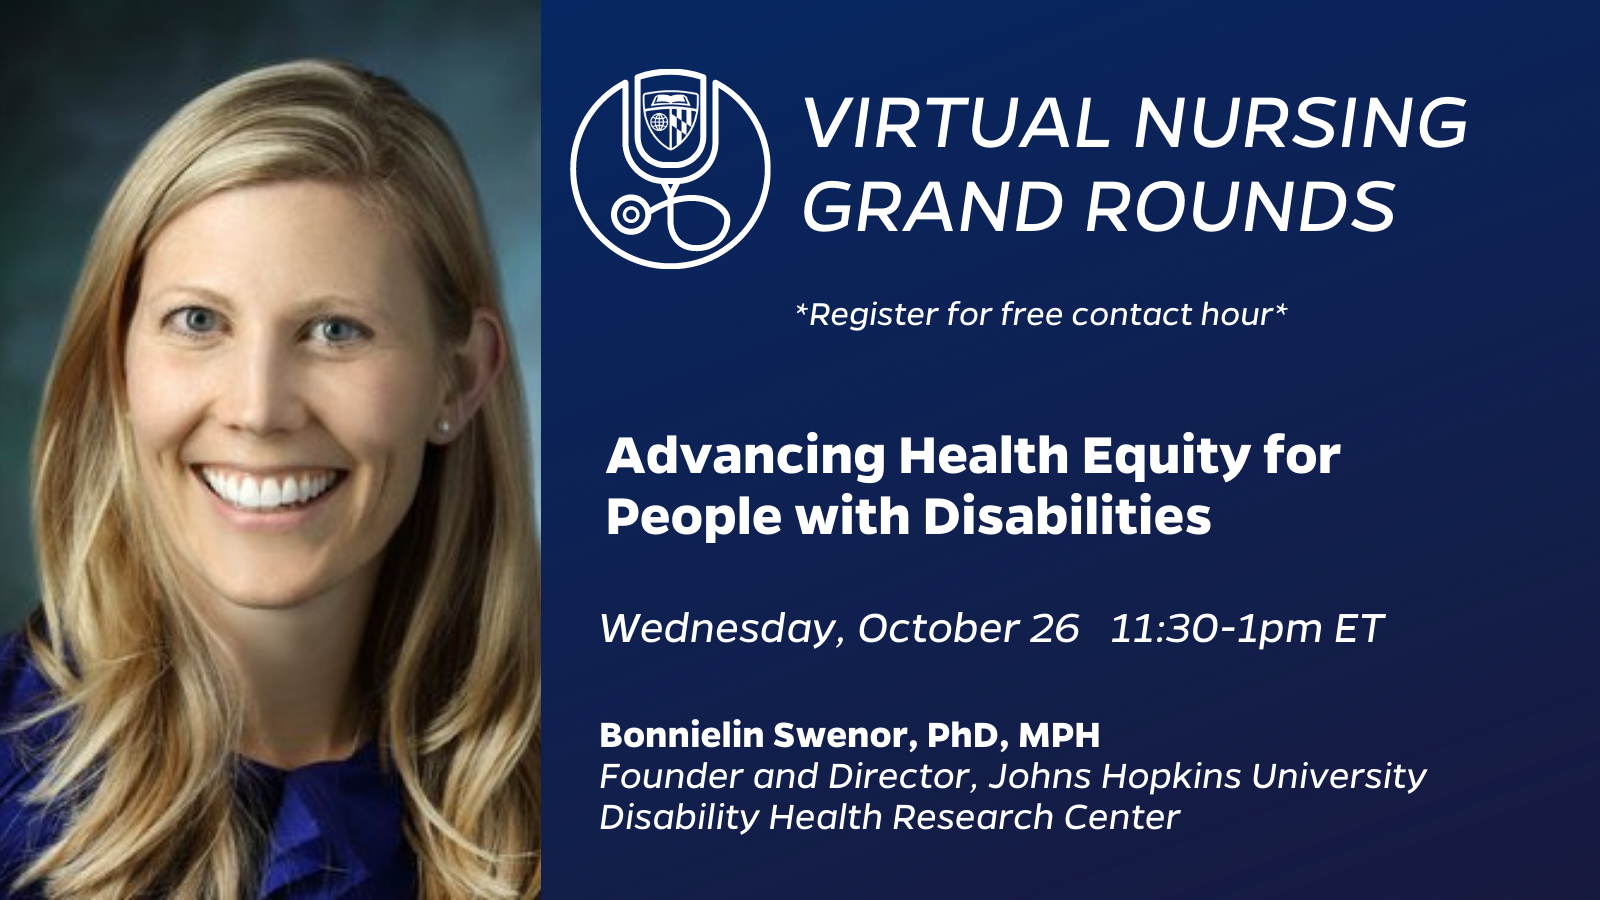 Virtual Nursing Grand Rounds: Advancing Health Equity for People with Disabilities